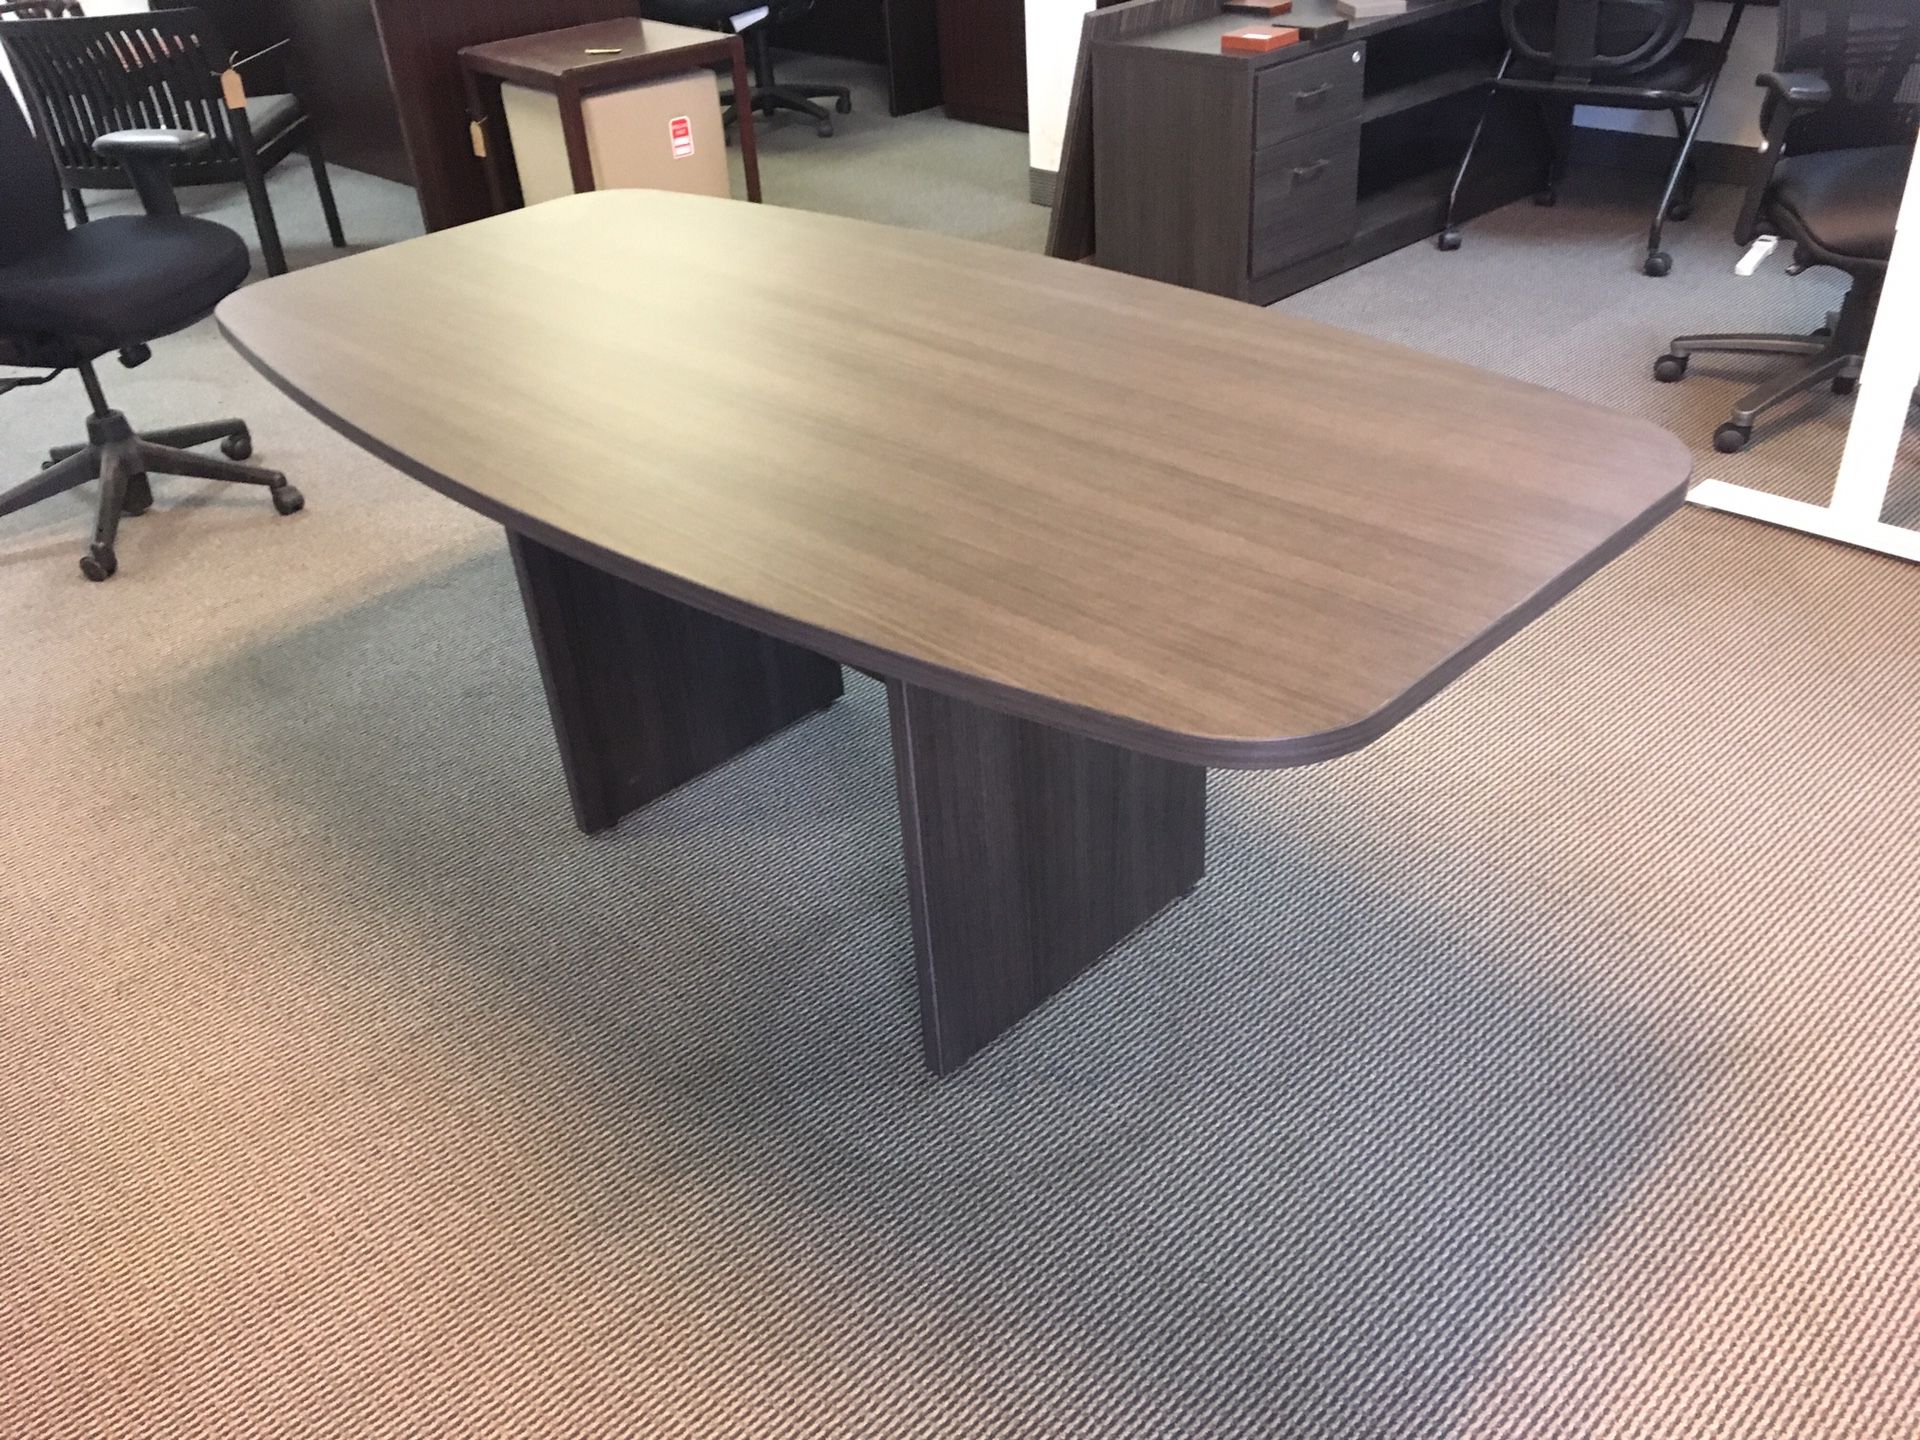 6x3 boat shape conference table in tenino gray